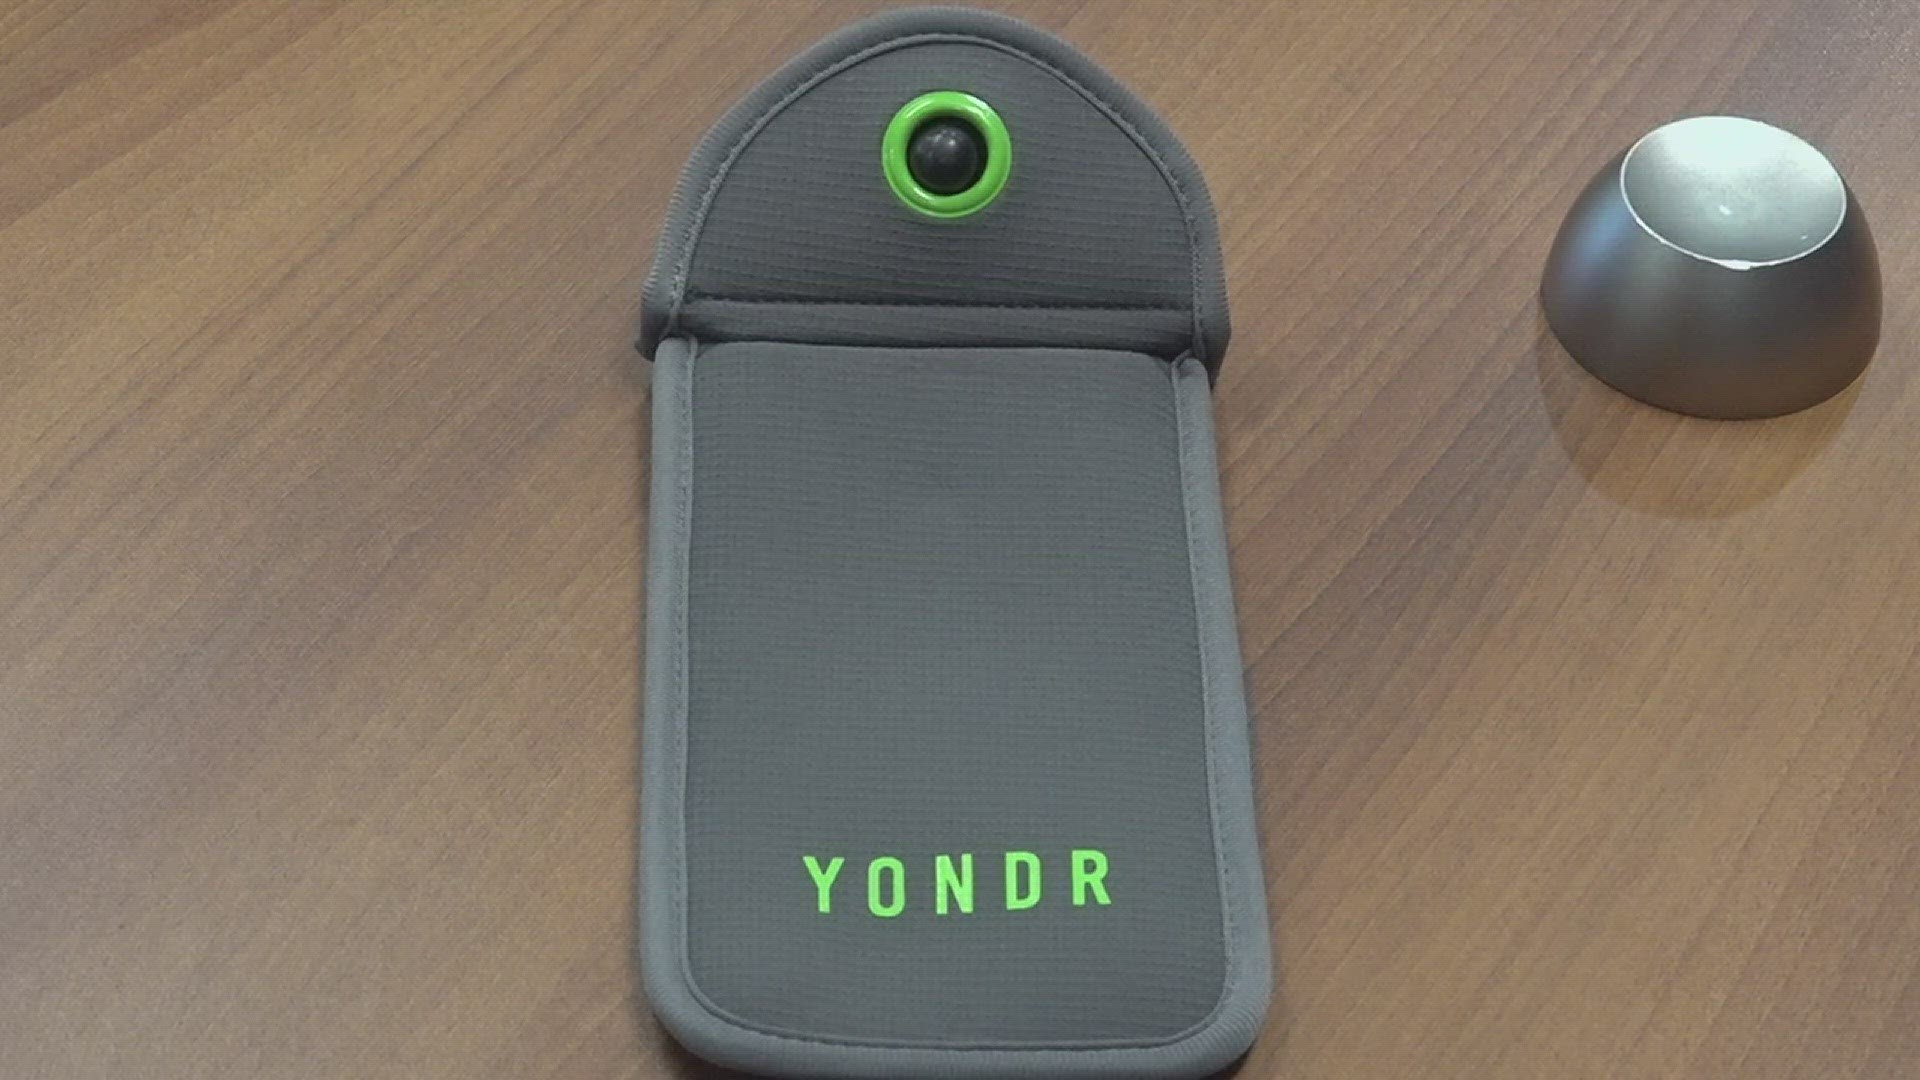 Woodville ISD limits cell phone use with Yondr pouches